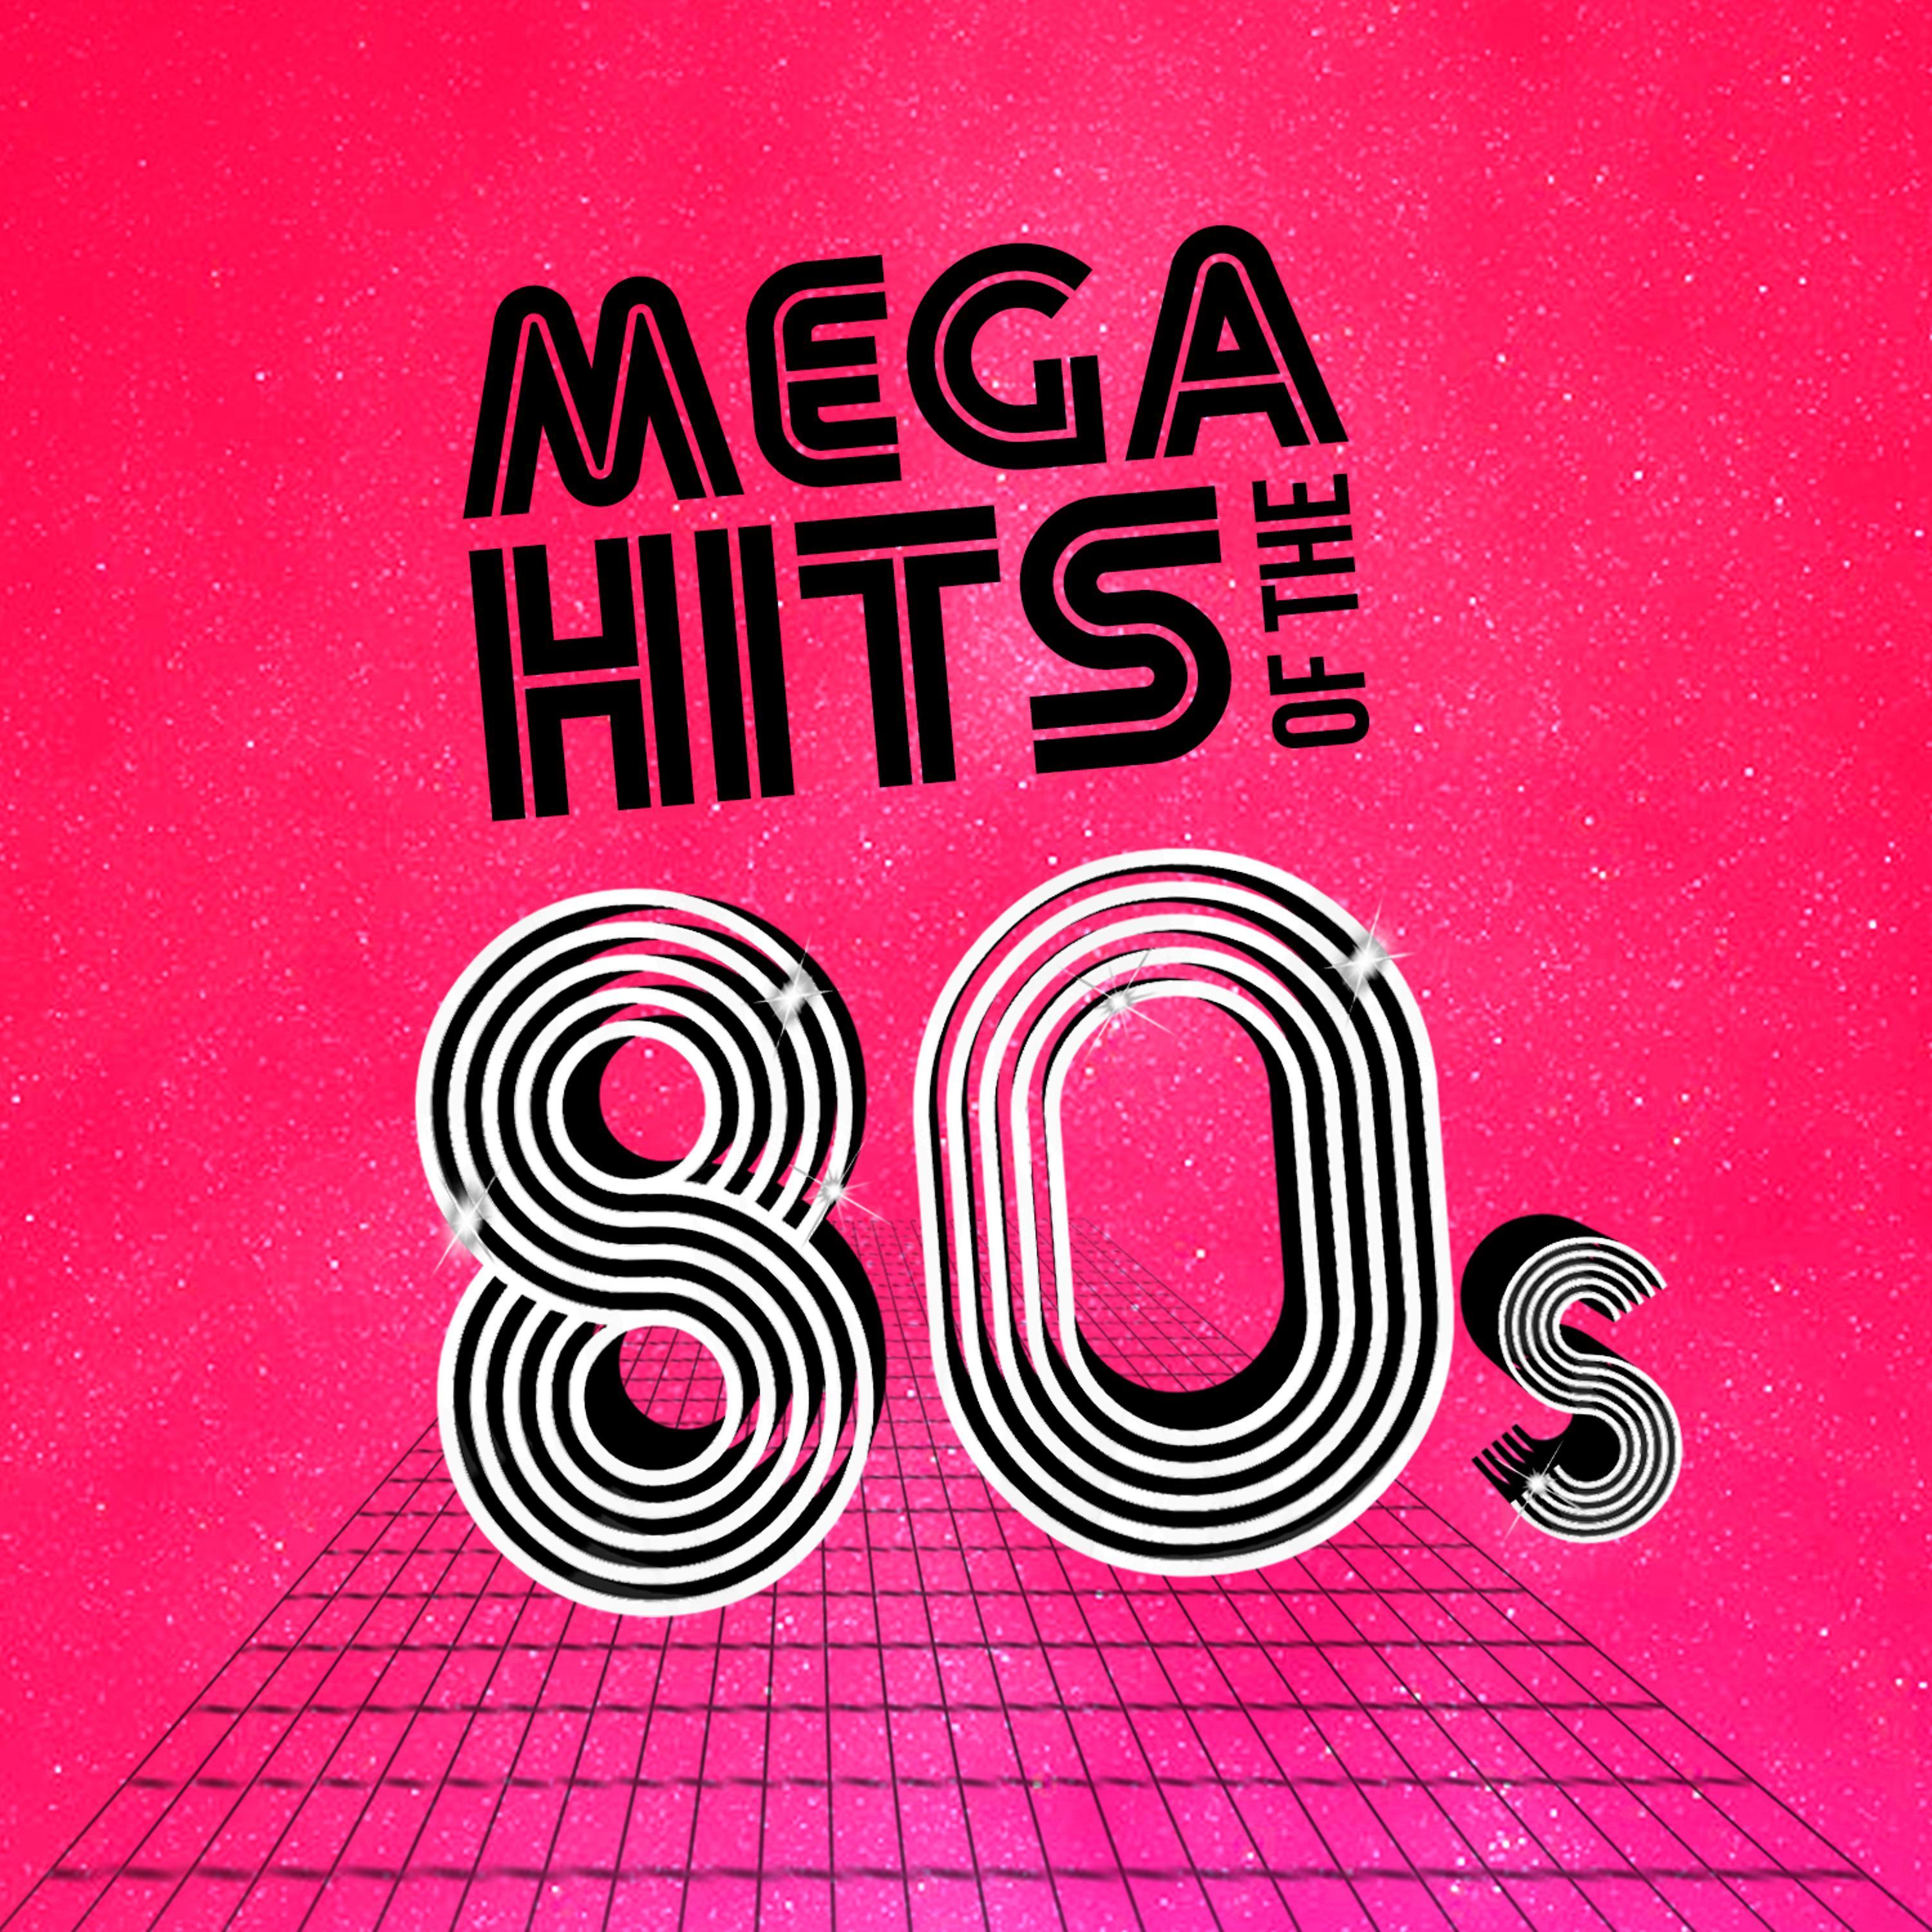 Flac 2015. 80s Hits. Hits of 80'. 80s Music Hits. Альбом super Hits: 80's.